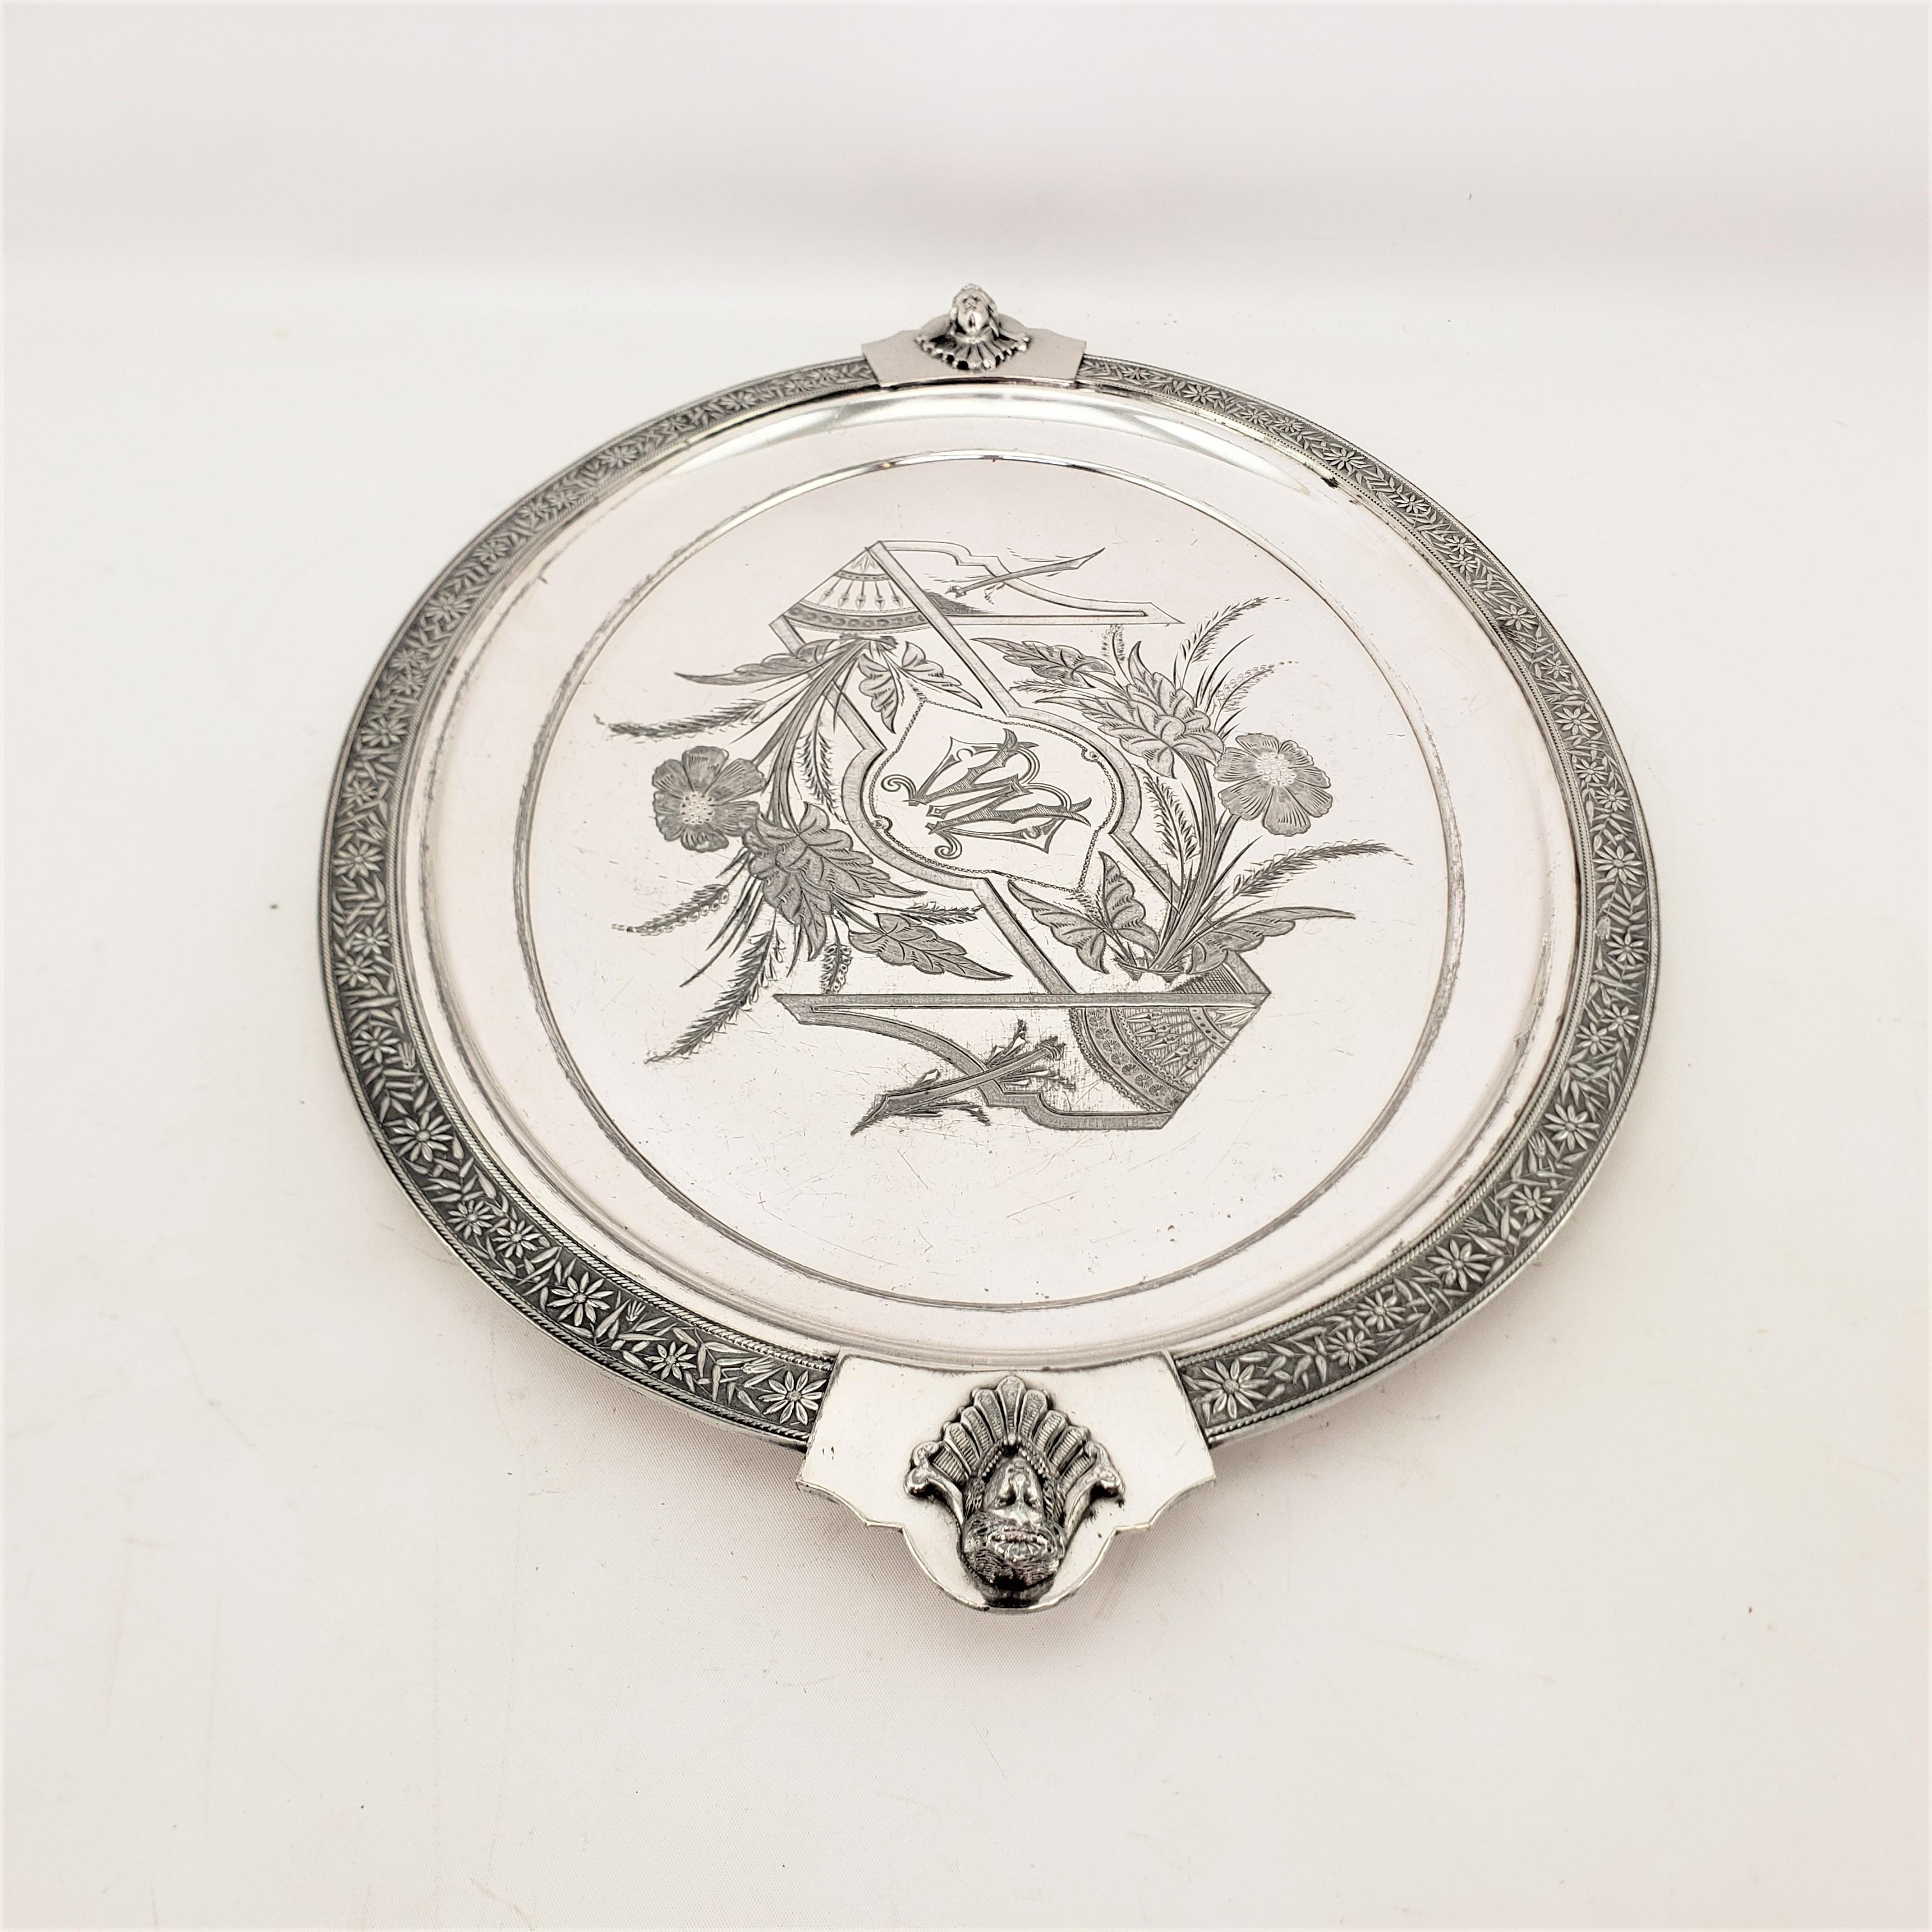 Antique English Silver Plated Serving Tray with Neoclassical Styled Decoration For Sale 3